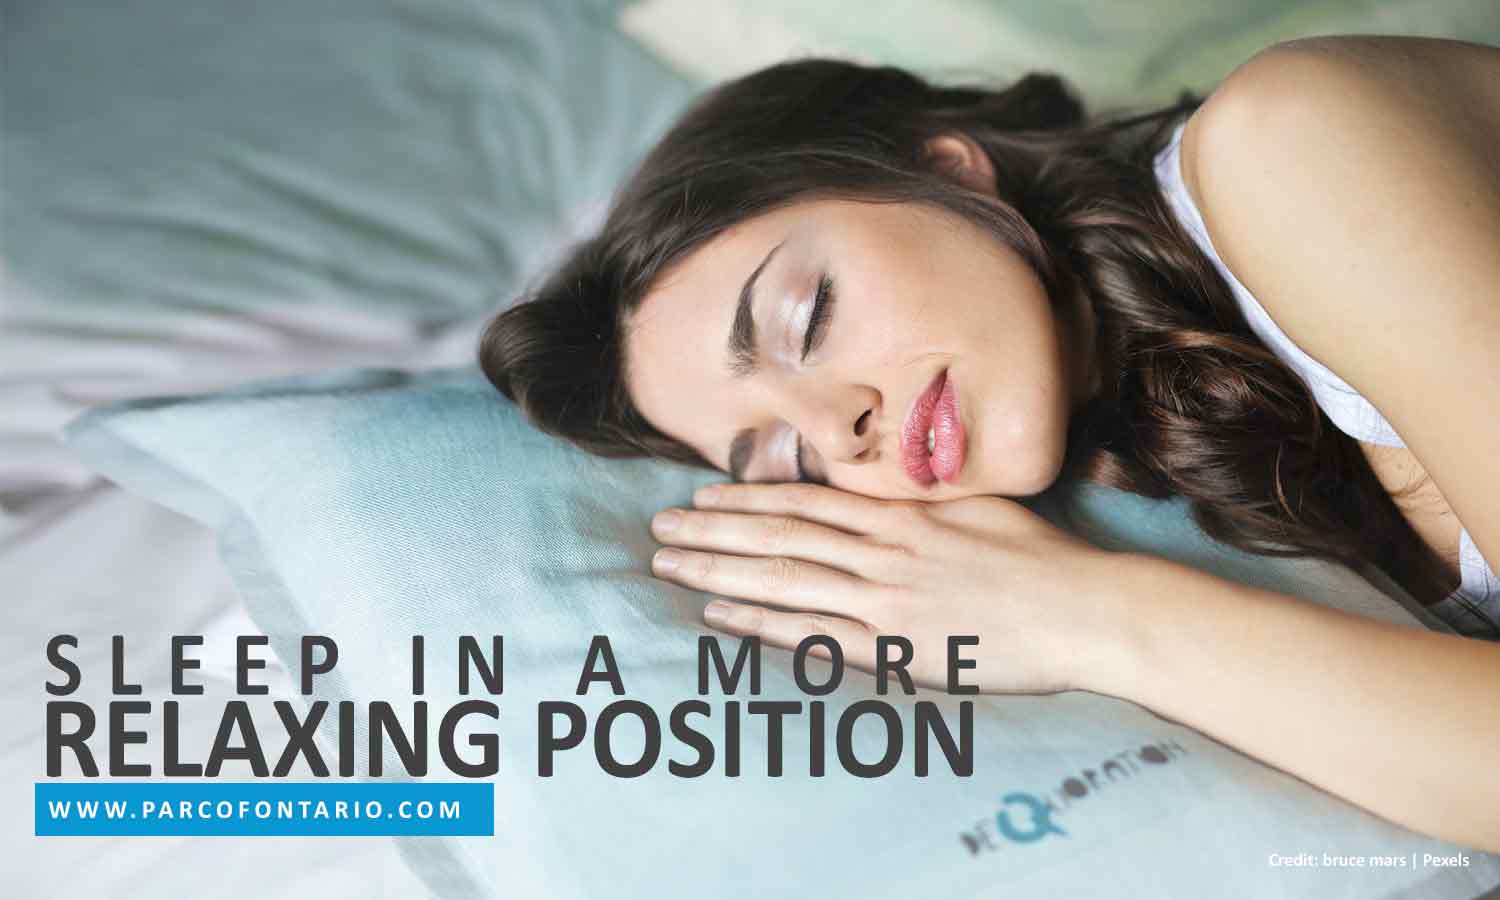 Sleep in a more relaxing position